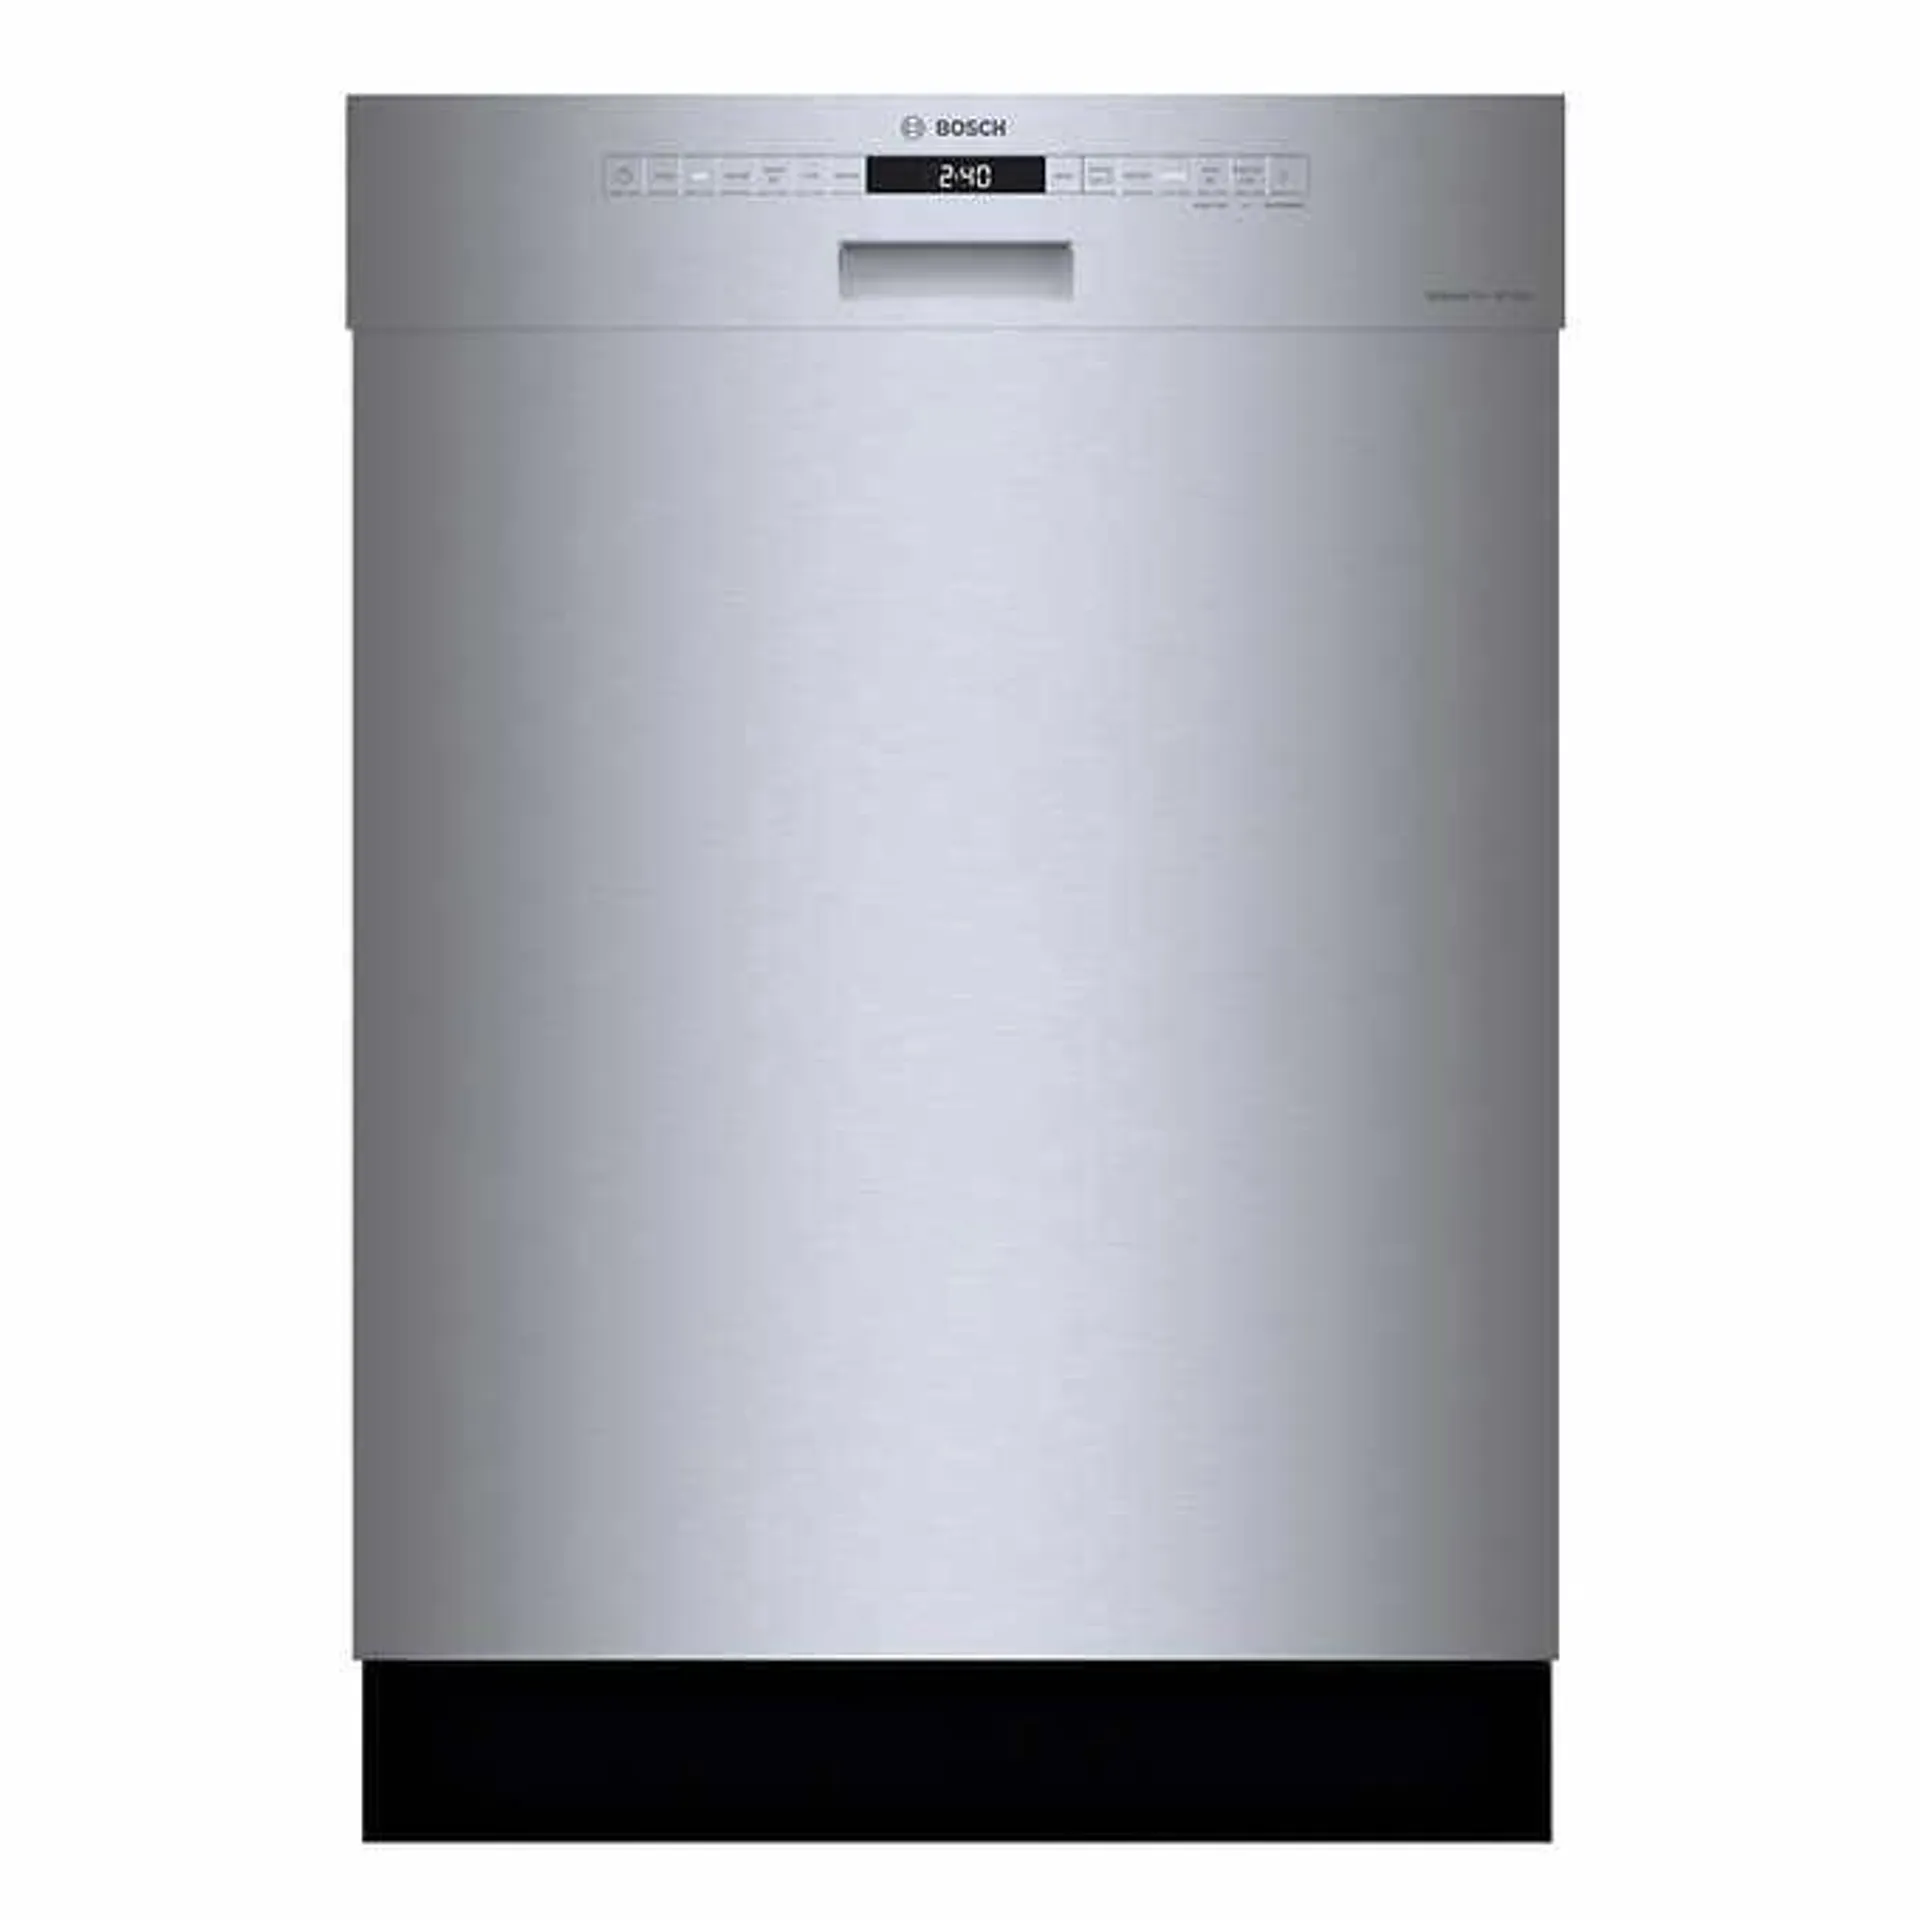 Bosch 300 Series 24 in. Stainless Steel Built-In Dishwasher with Home Connect